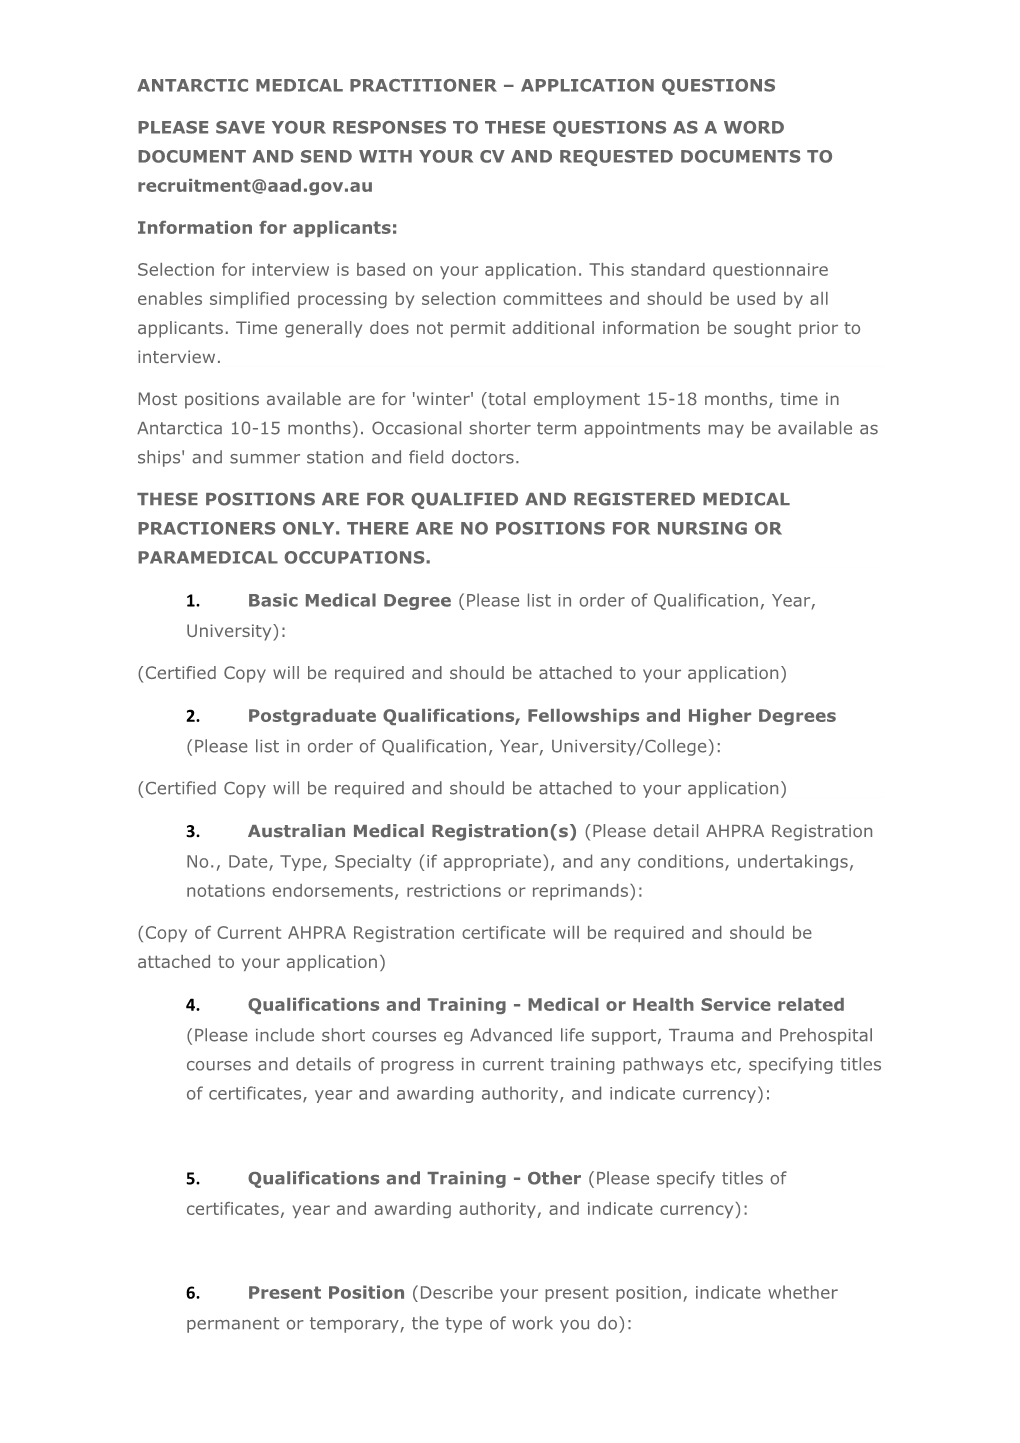 Antarctic Medical Practitioner Application Questions